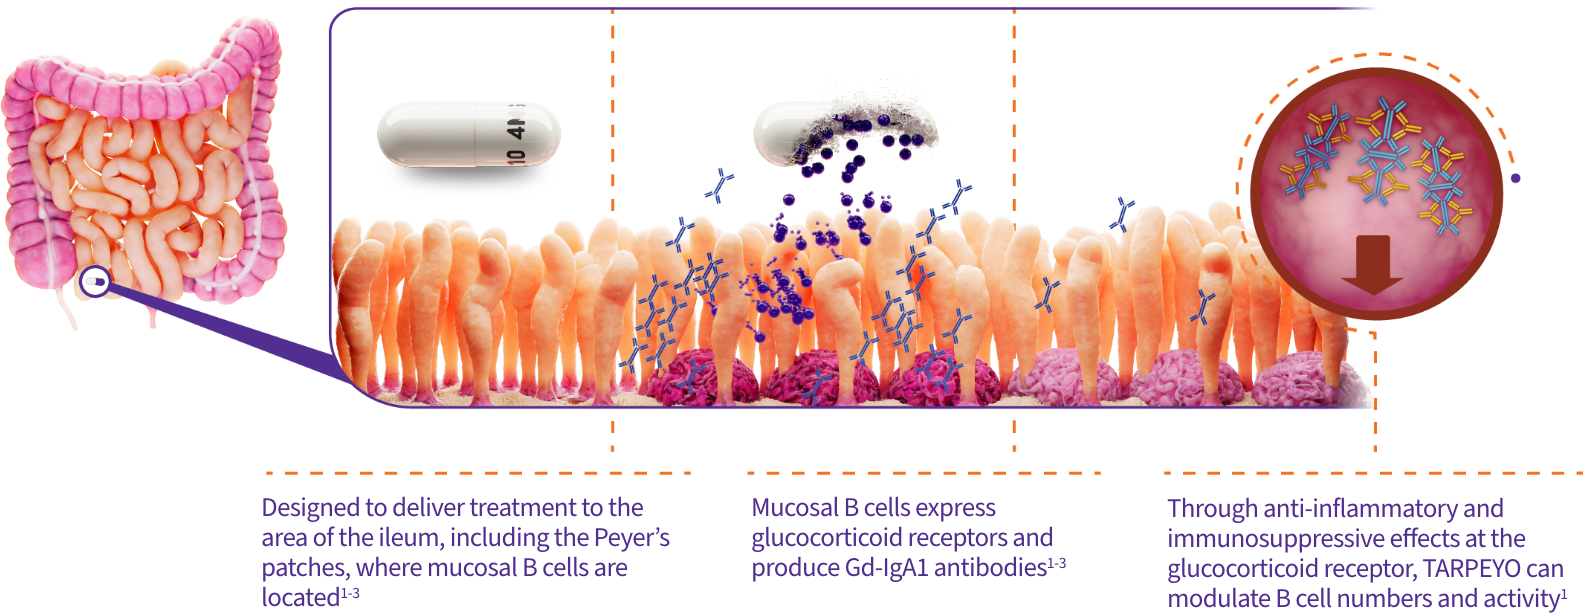 An illustration of how TARPEYO is designed to deliver treatment to the gut